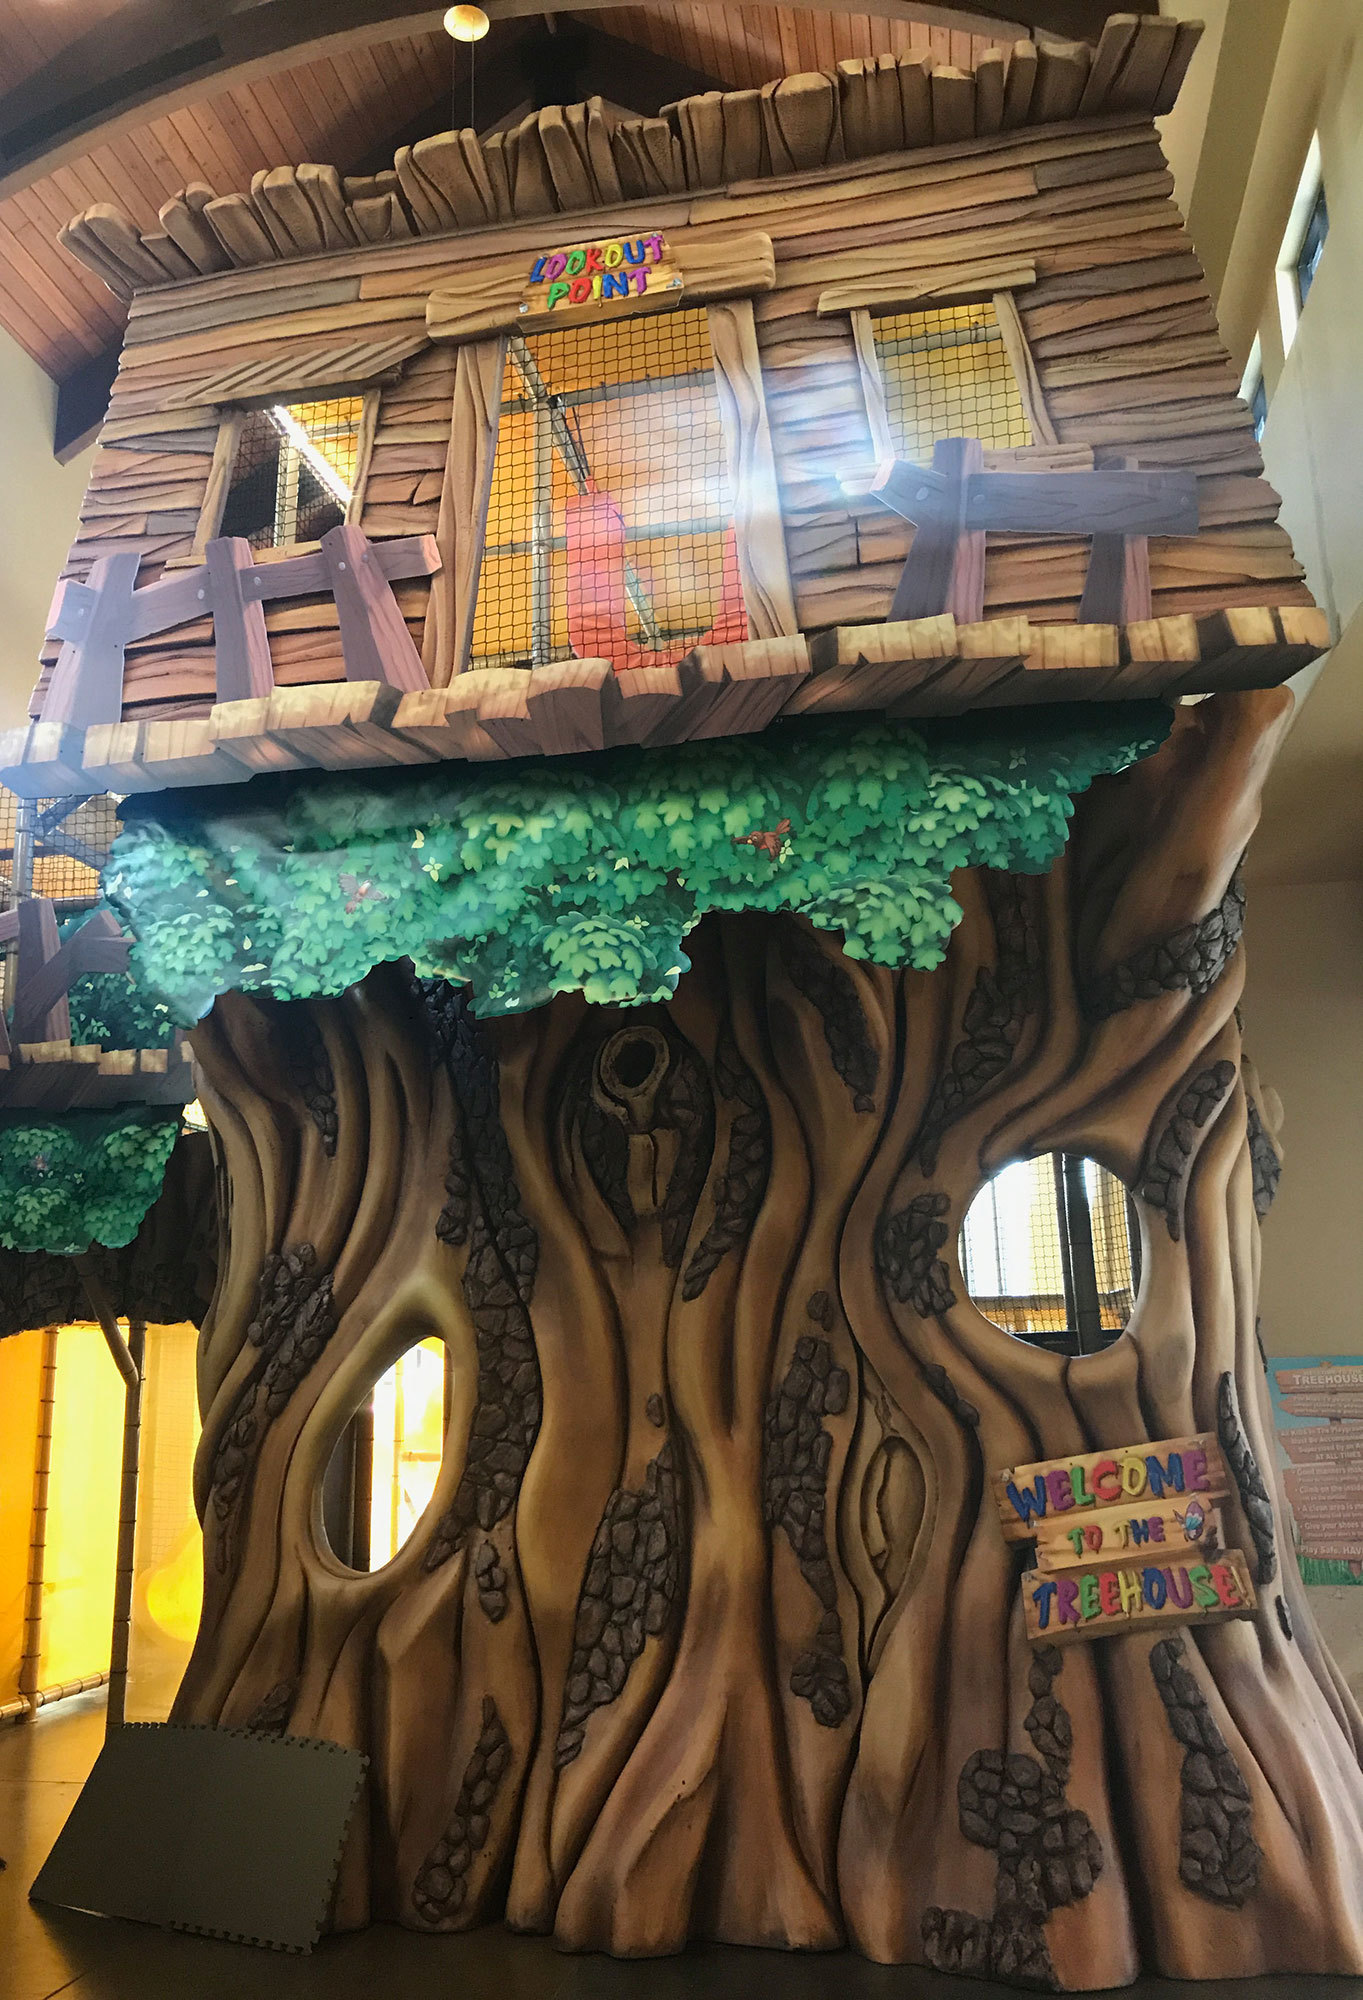 3D Sculpted Treehouse Play Area Facade with signs reading "Lookout Point" and "Welcome To The Treehouse".